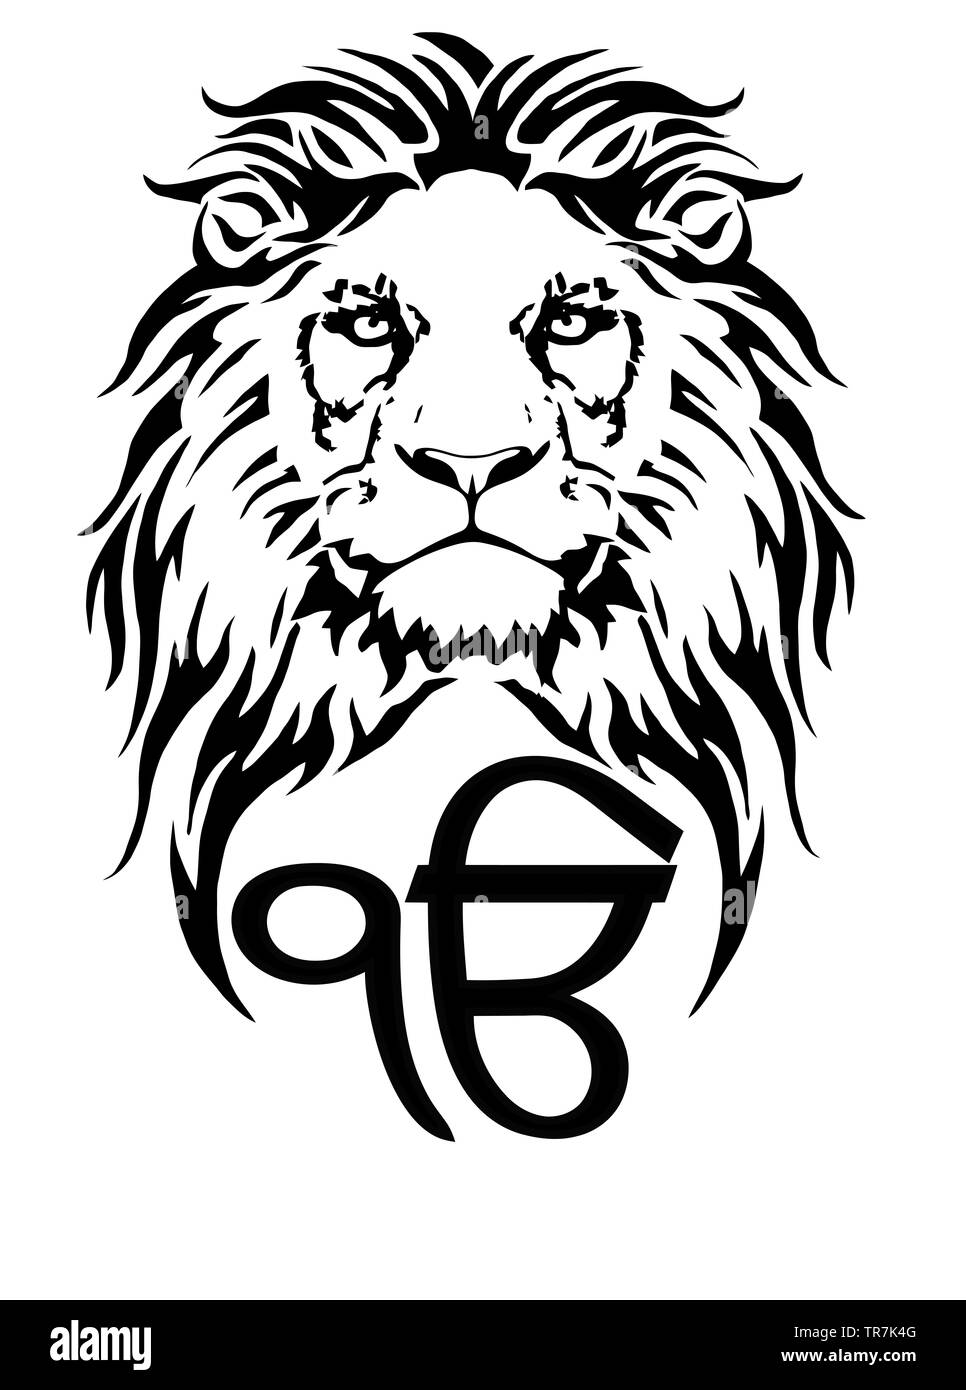 Sign Ek Onkar is the most significant symbol of Sikhism, decorated with a Lion with a long mane, on a white background, isolated, drawing for tattoo Stock Photo